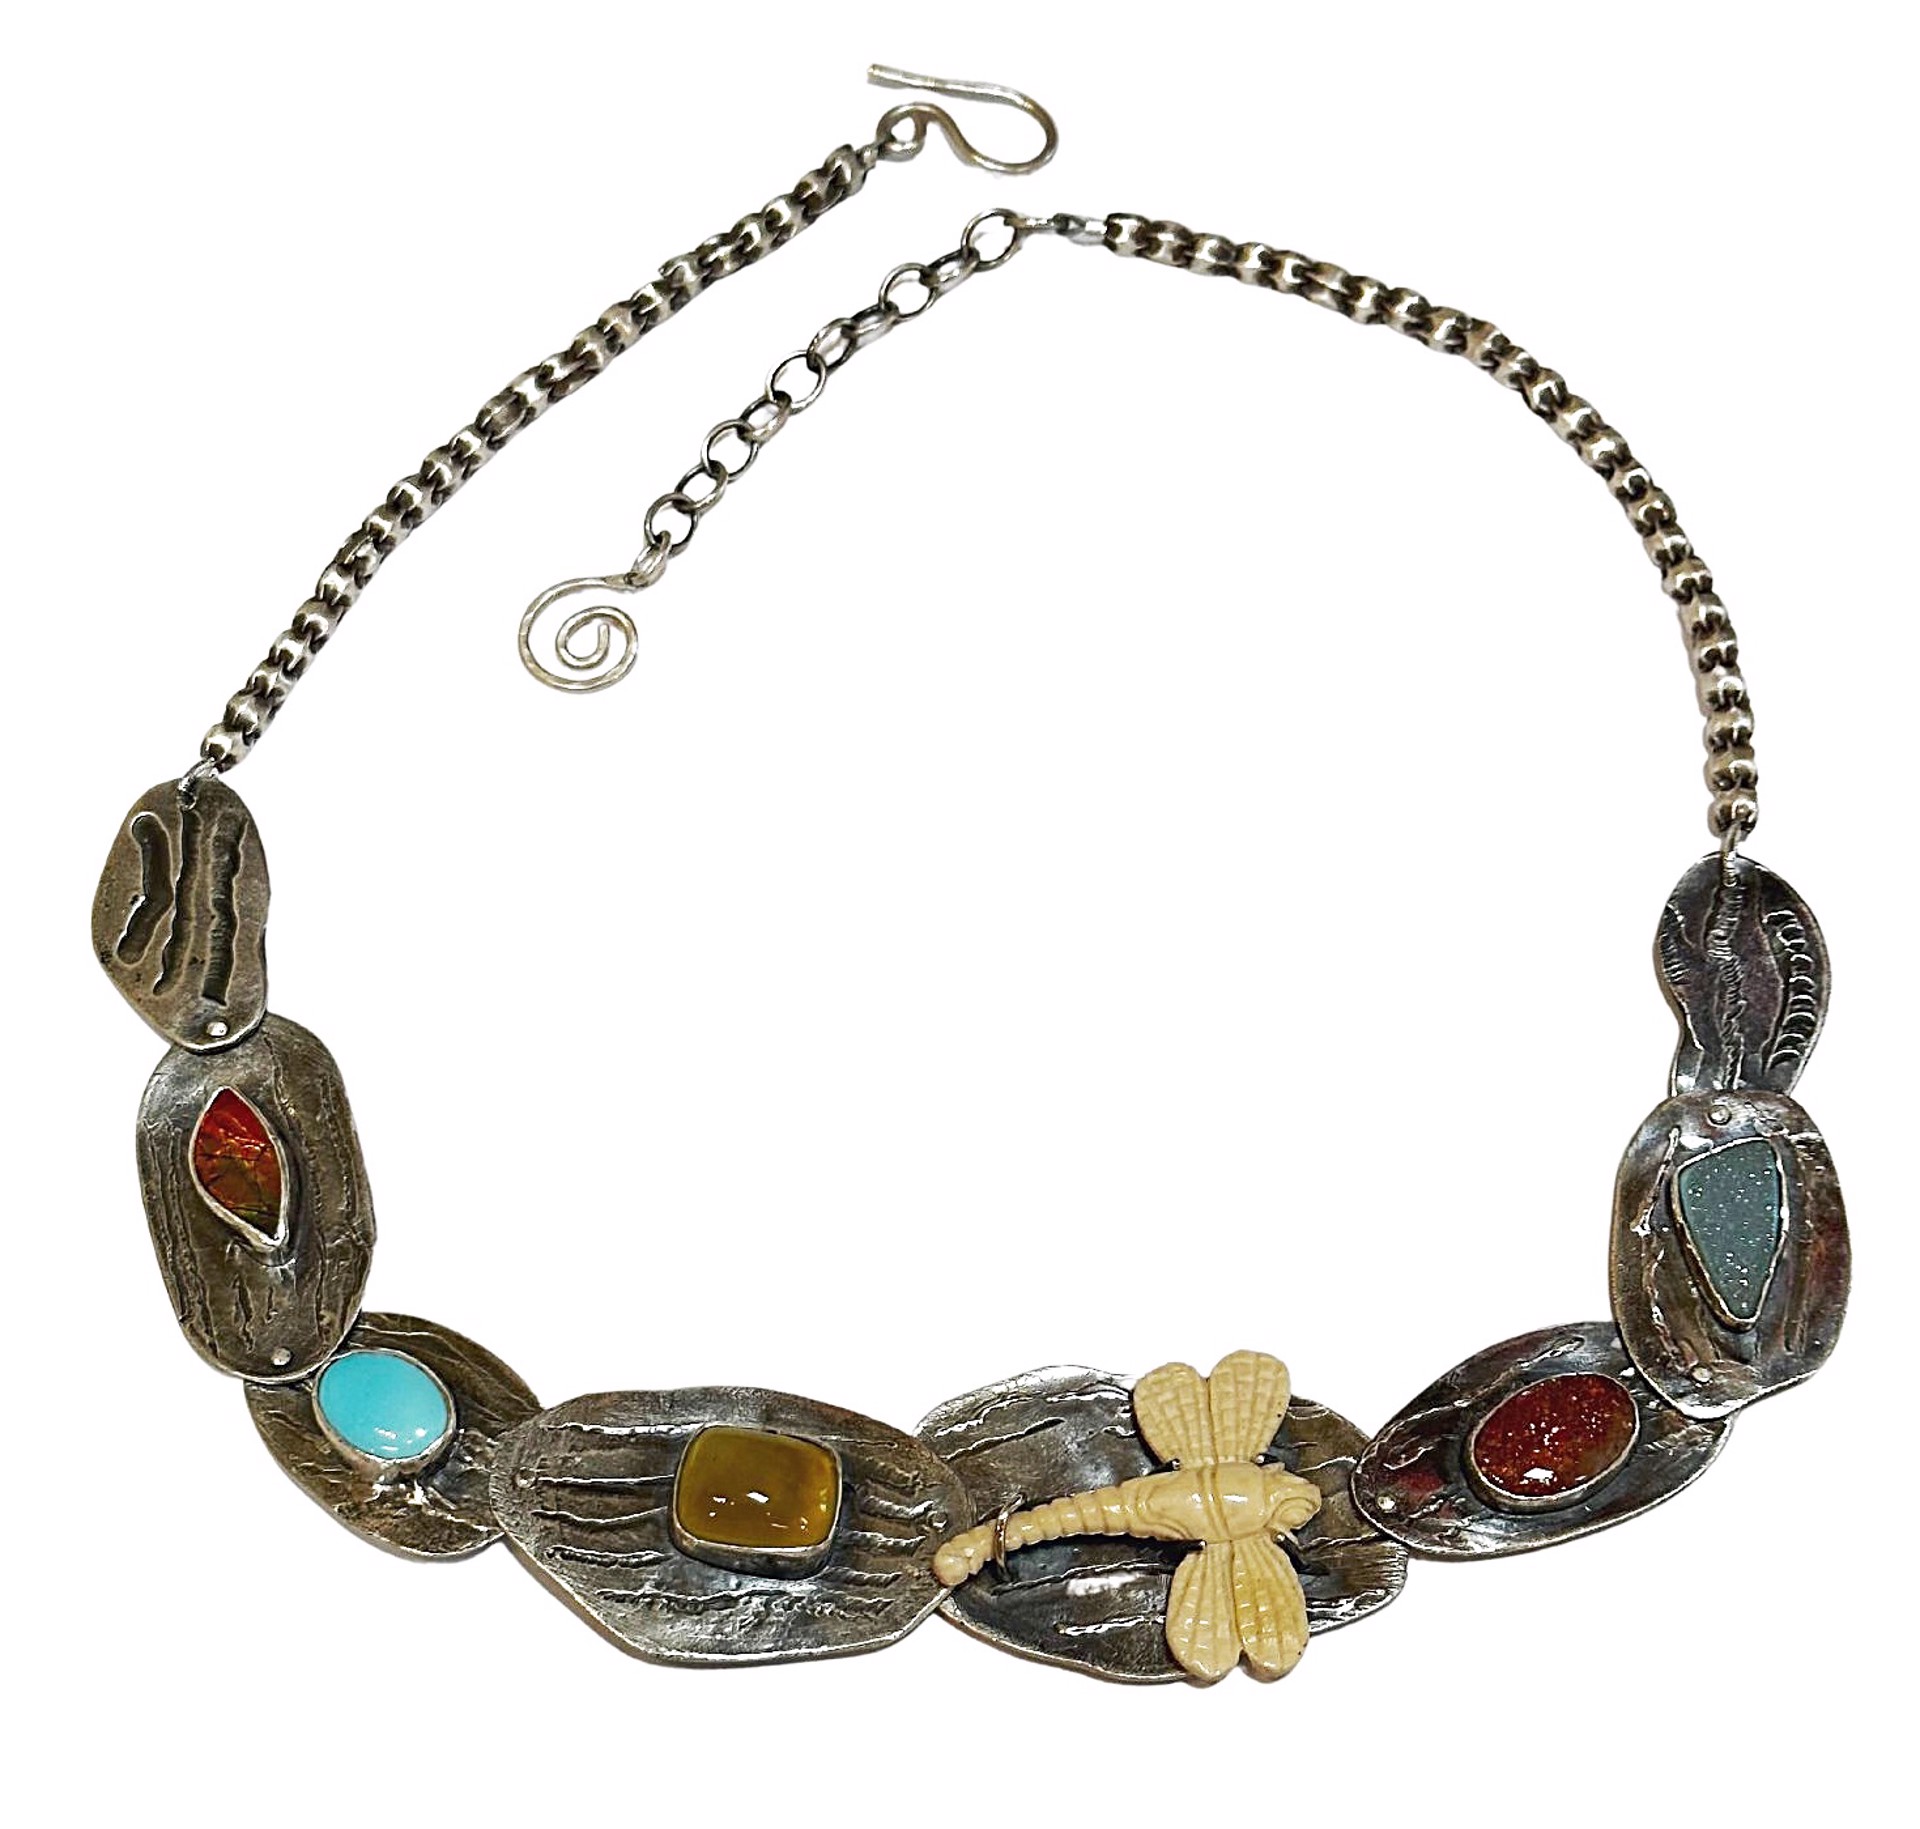 Desert Dragonfly Necklace by Doris King